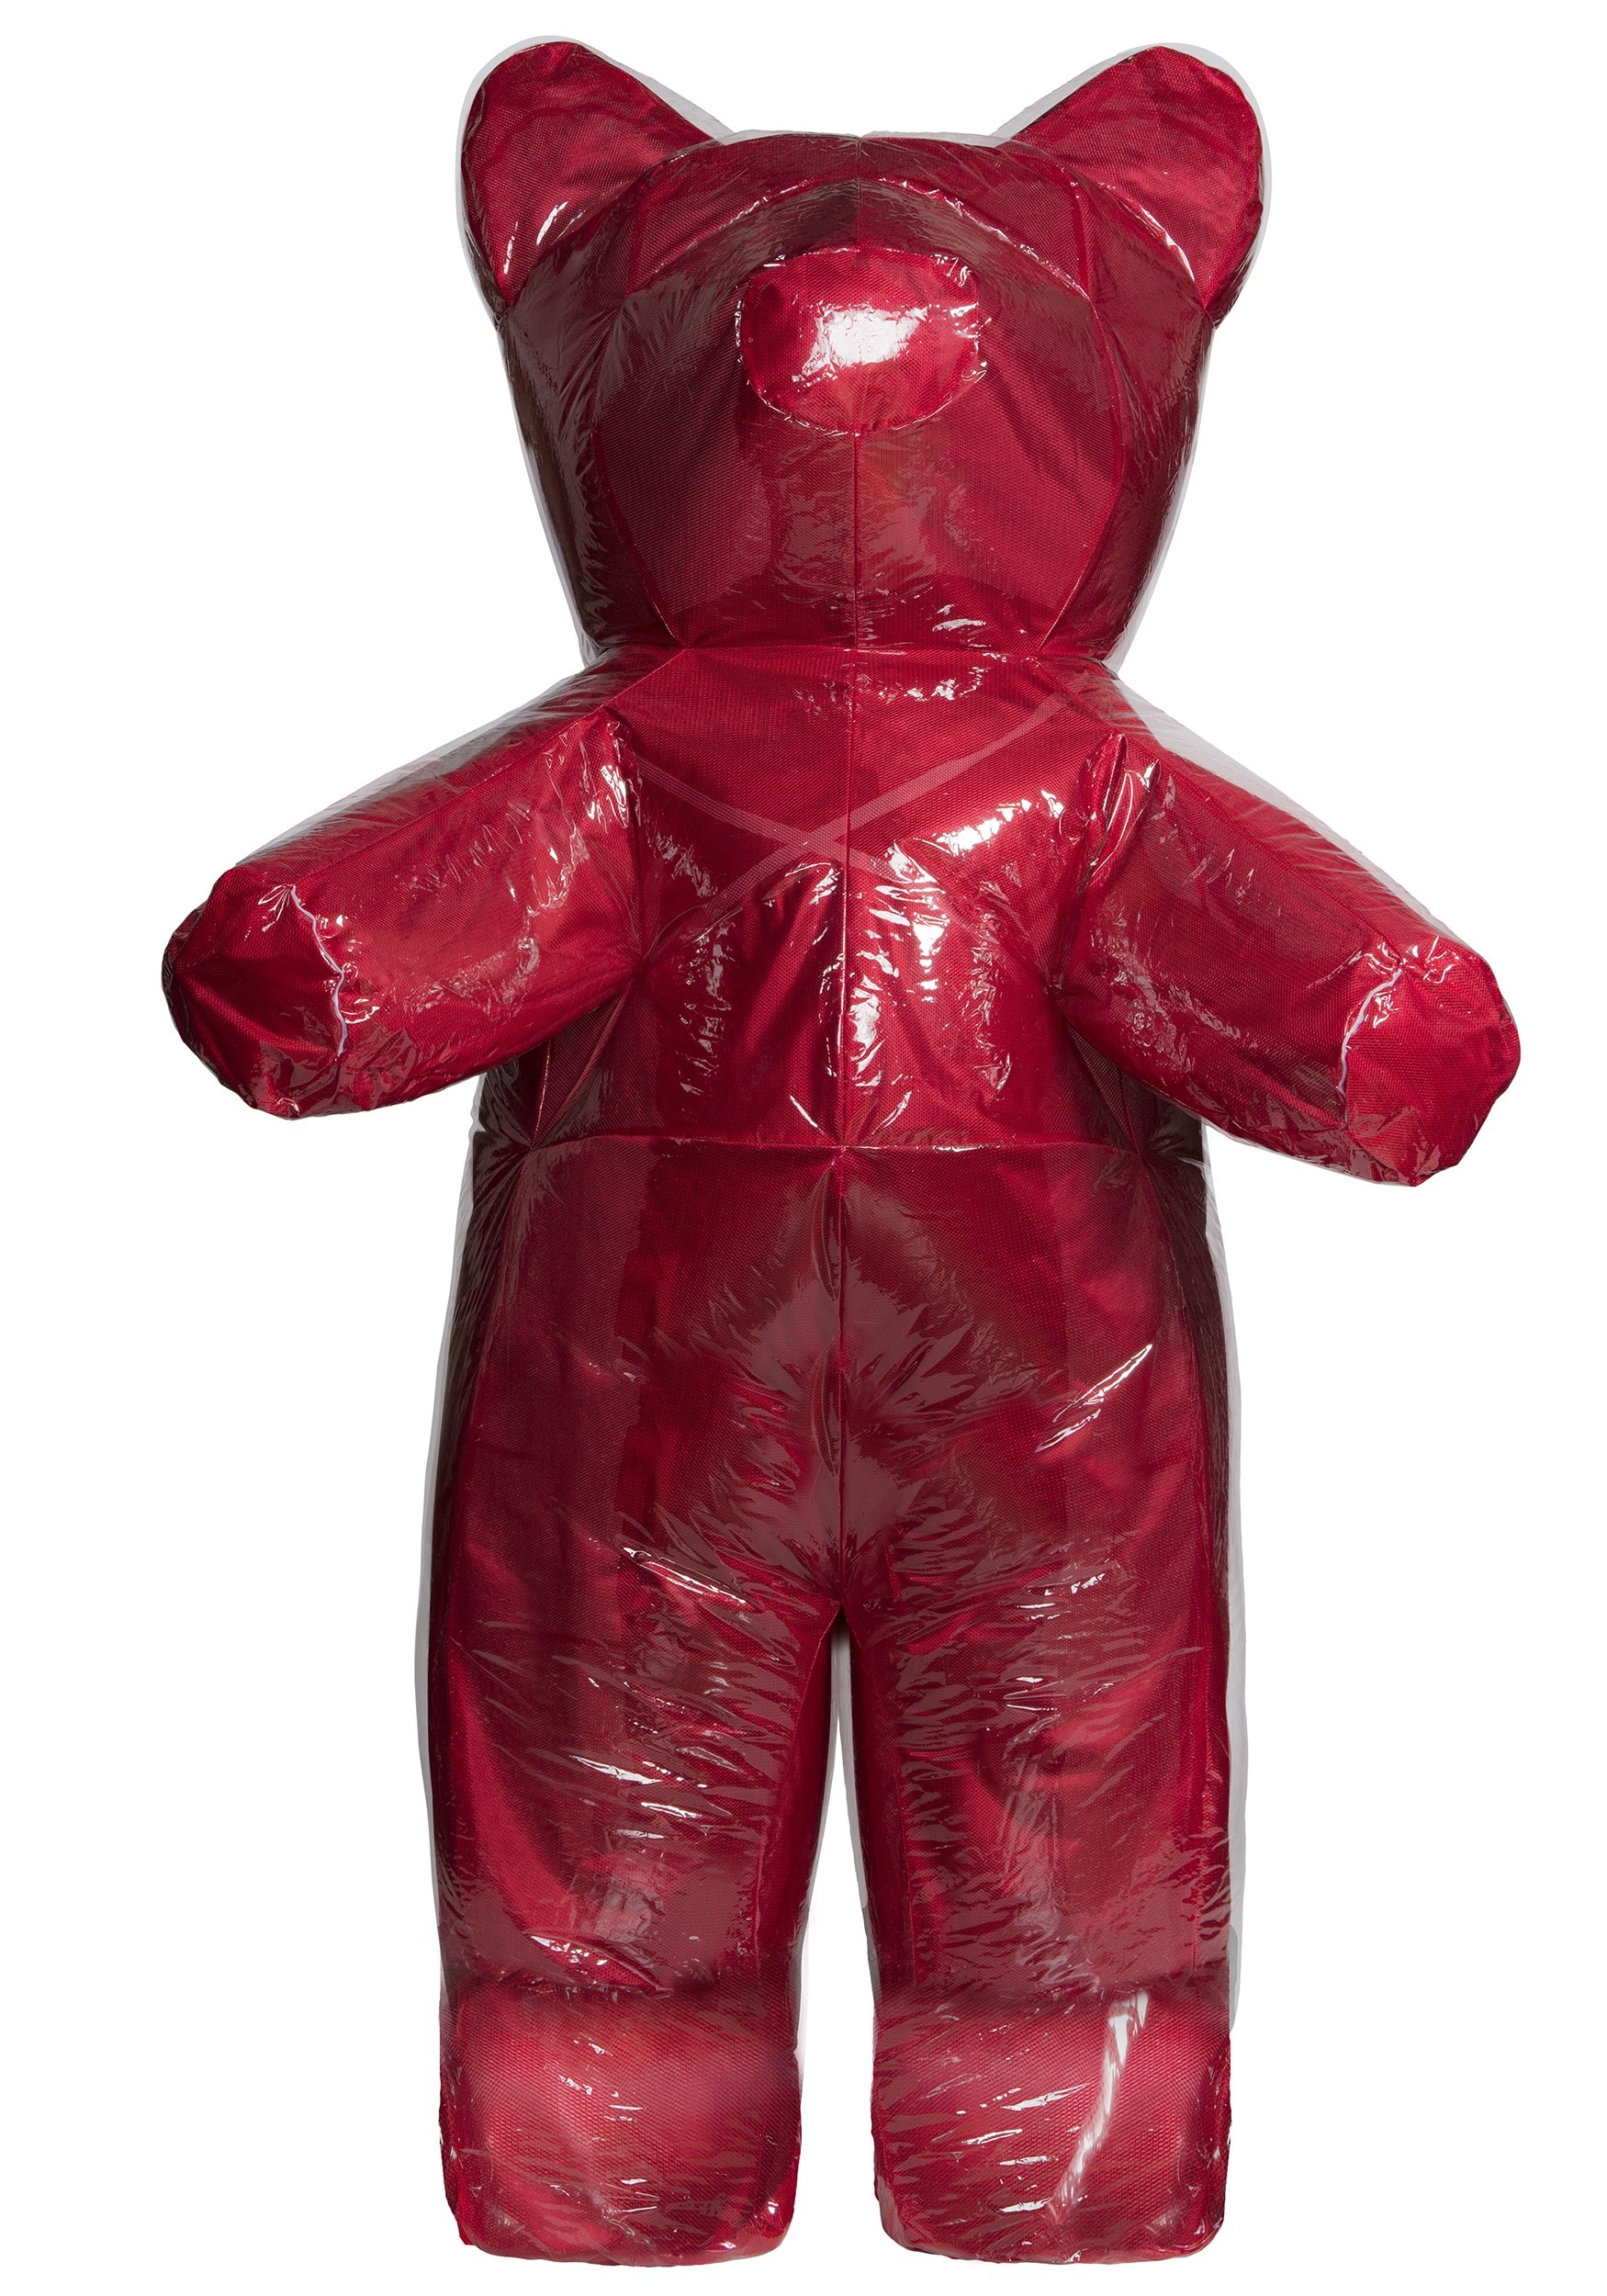 Inflatable Gummi Costume One Size All Candy